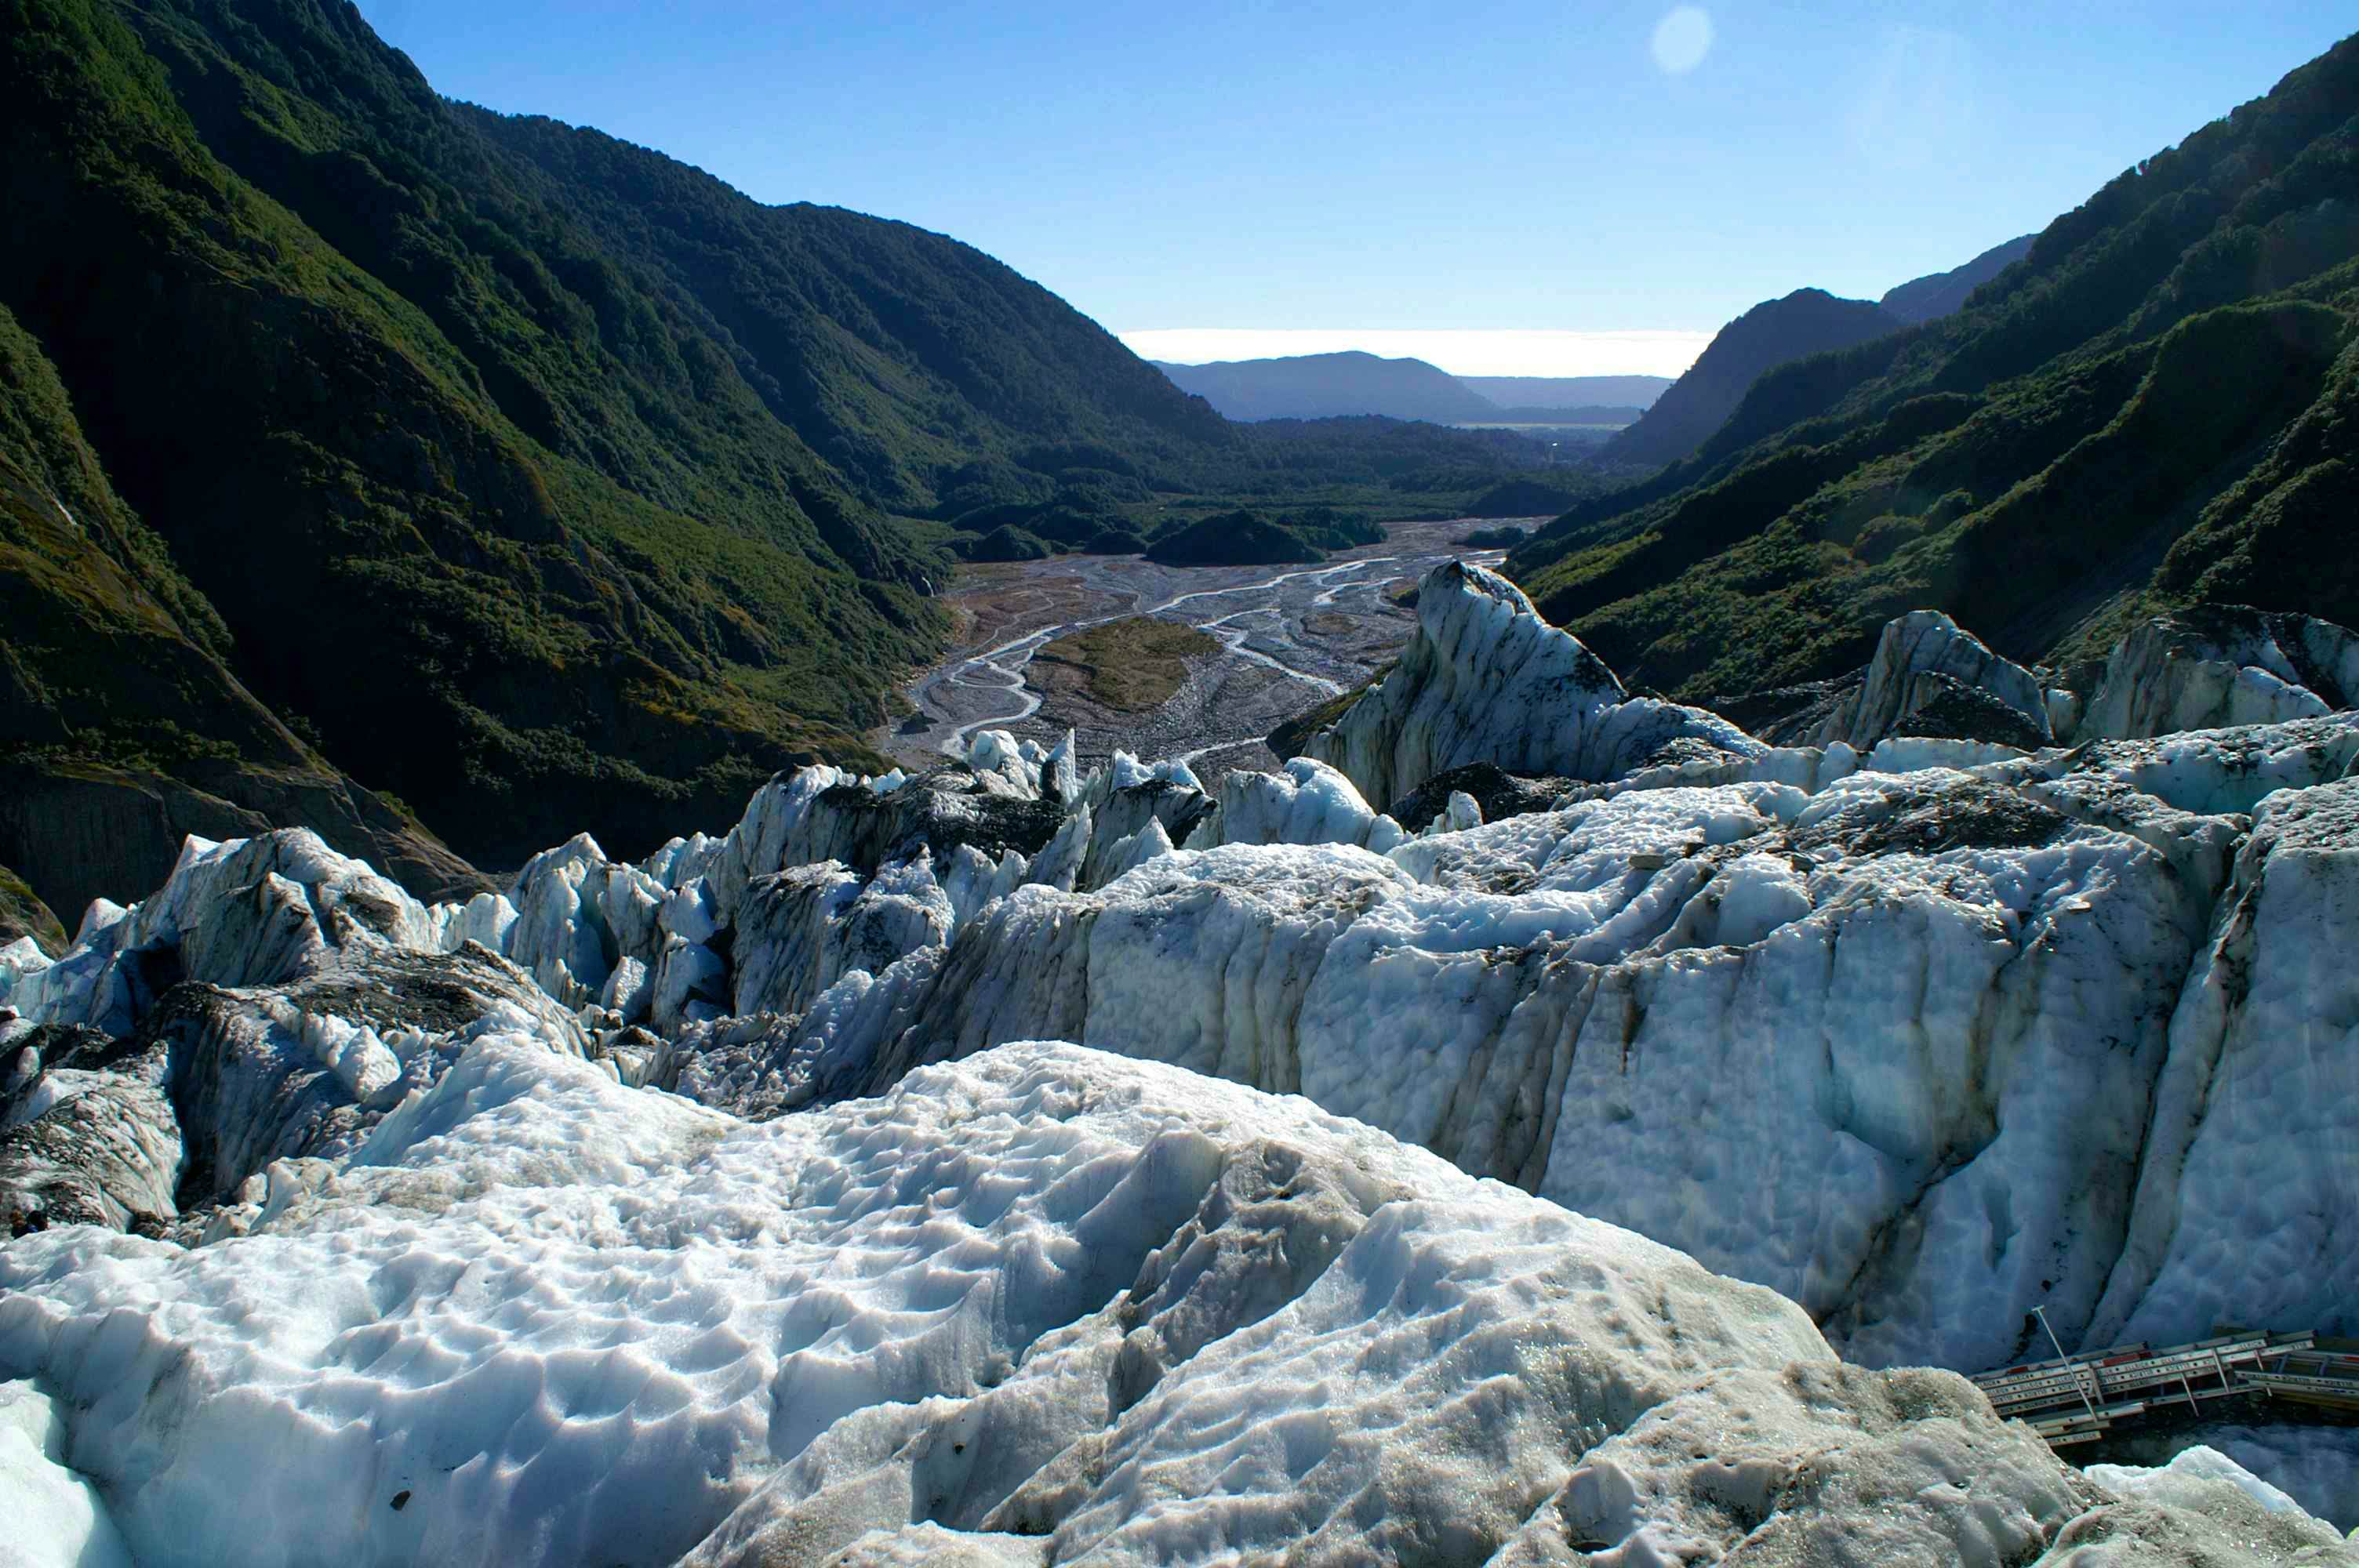 Glacier valley walk at Franz Josef and trails exposed to scenic views